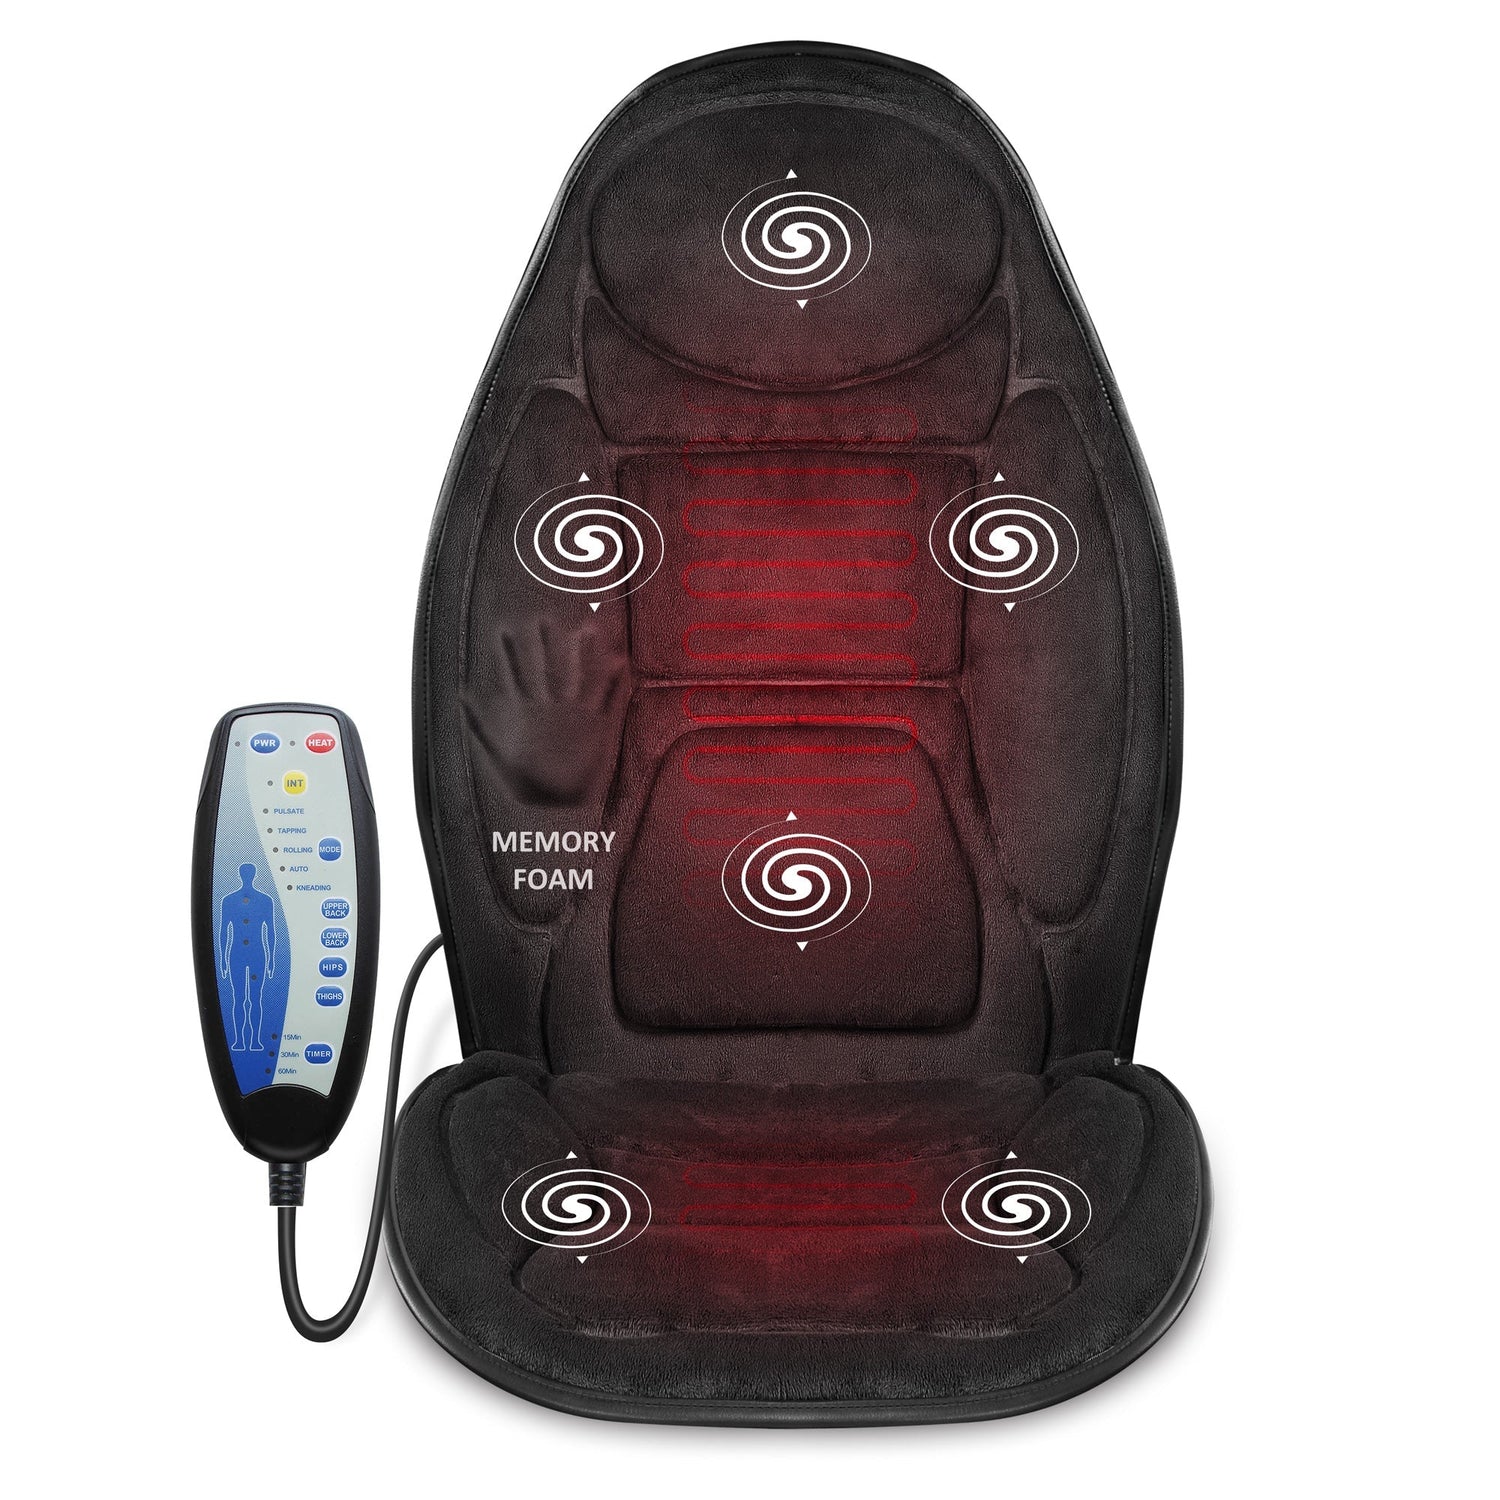 Snailax Massage Mat with 10 Vibrating Motors and 4 Therapy Heating pad Full  Body Massager Cushion for Relieving Back Lumbar Leg